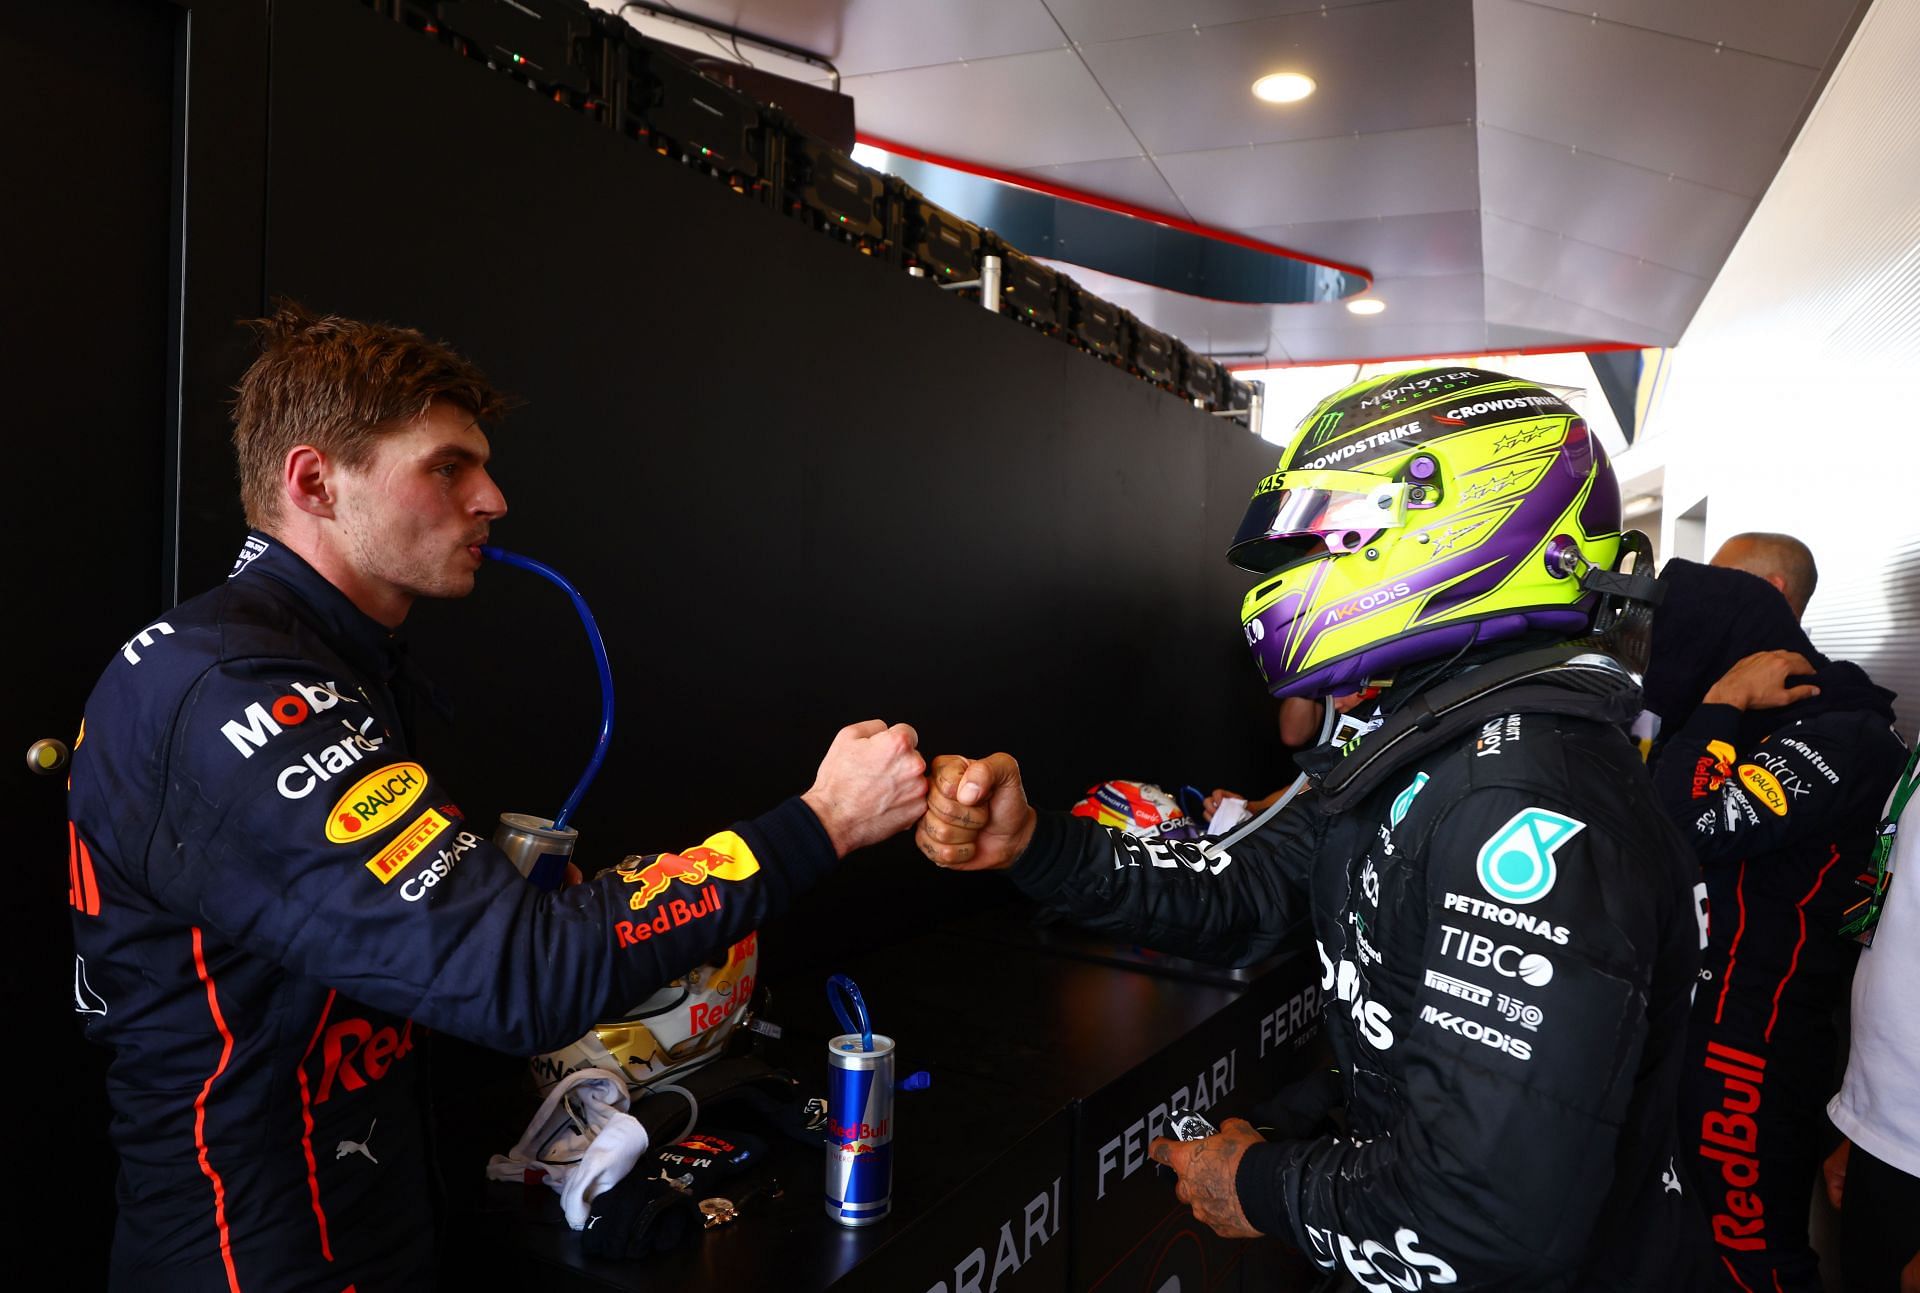 2022 F1 Spanish GP winner Max Verstappen (left) is congratulated after the race by Mercedes&#039; Lewis Hamilton in parc-ferme. (Photo by Mark Thompson/Getty Images)